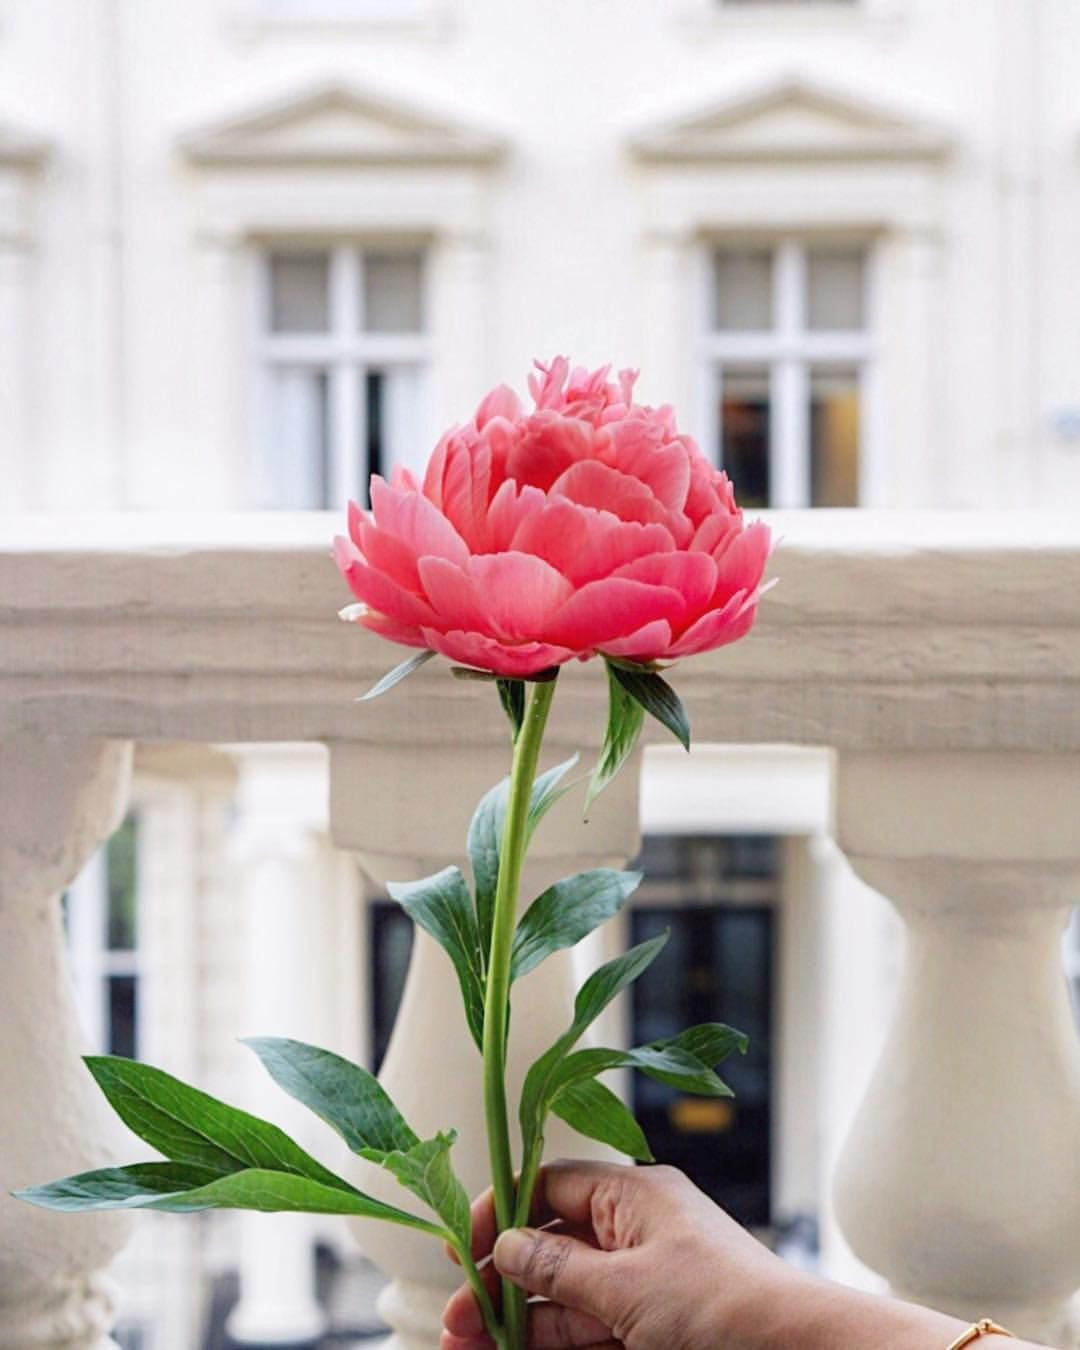 23 Spectacular Best Vase for Peonies 2024 free download best vase for peonies of just a peony for a thursday have a lovely day ac298c280 thats all with regard to ashita on instagram just a peony for a thursday dc29fc28cc2b8dc29fc292c295 hav